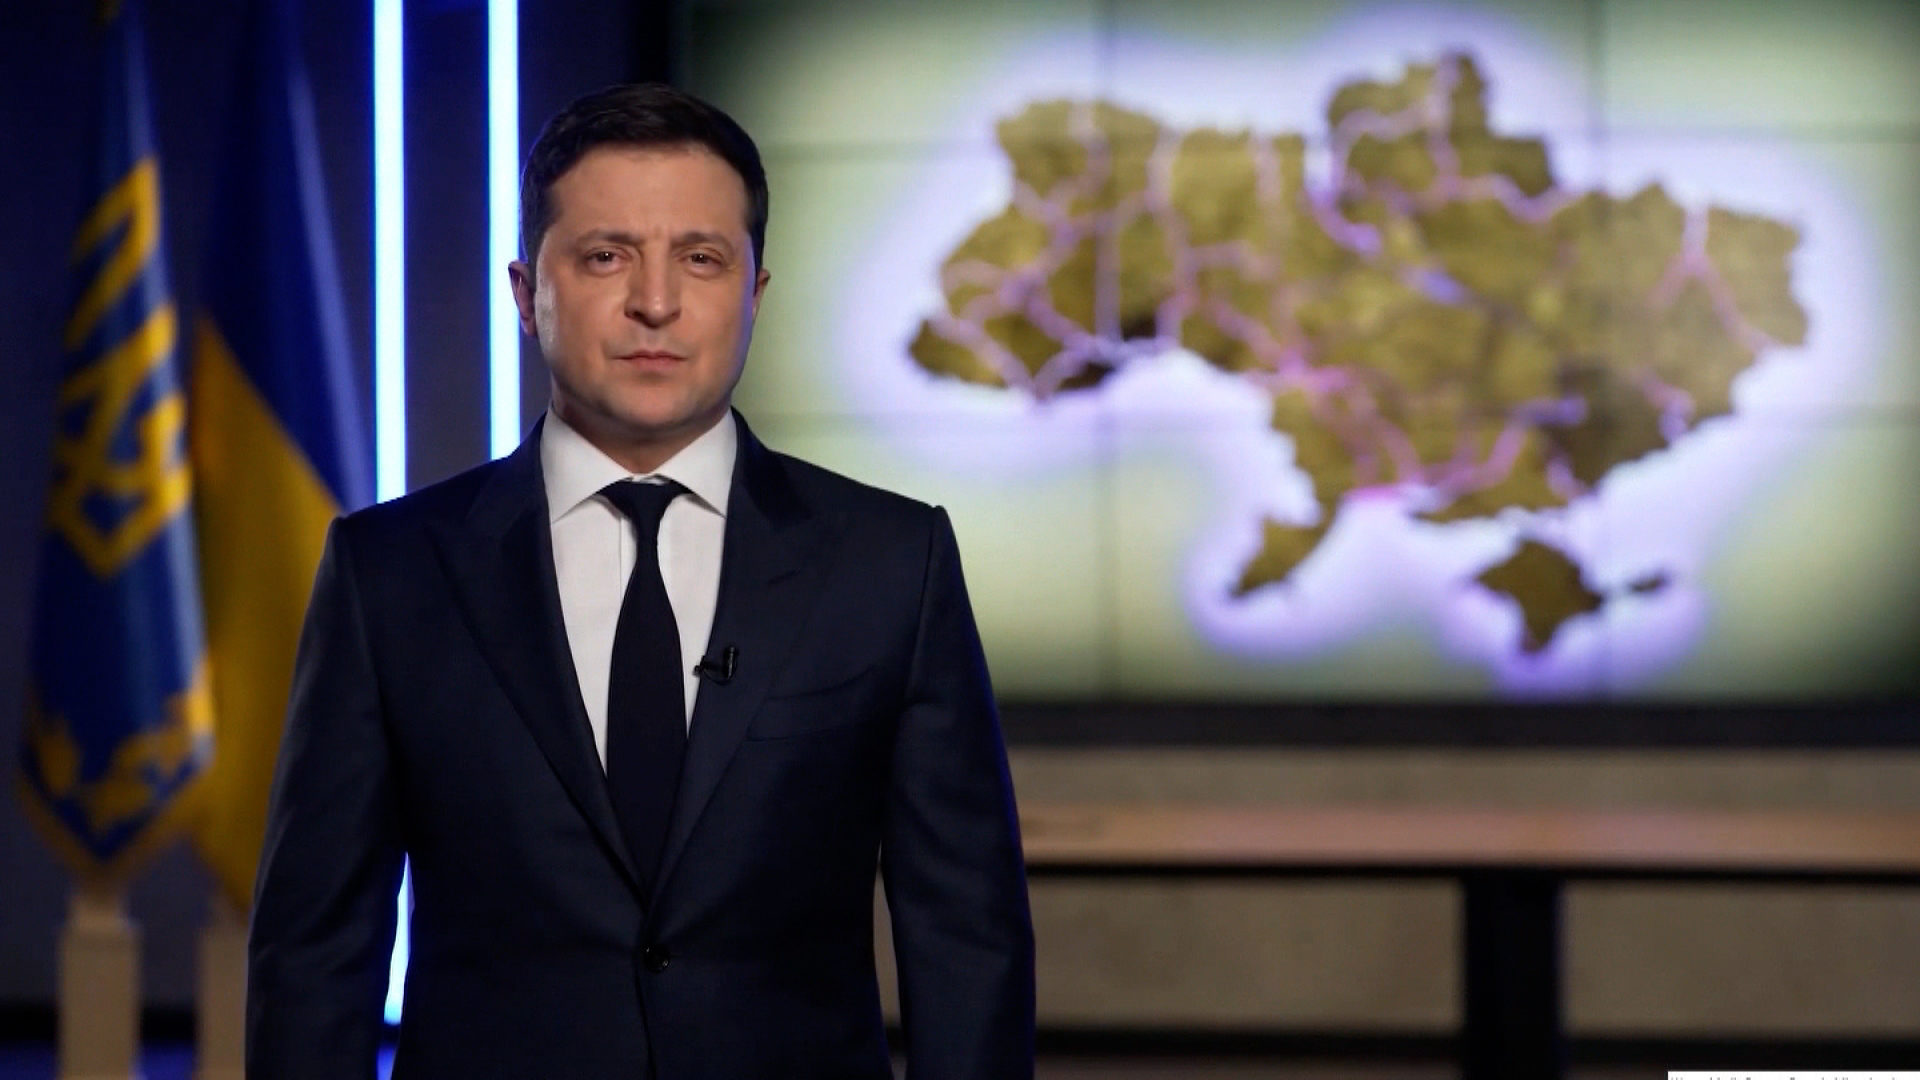 Video: Zelensky makes appeal to Russian citizens - CNN Video